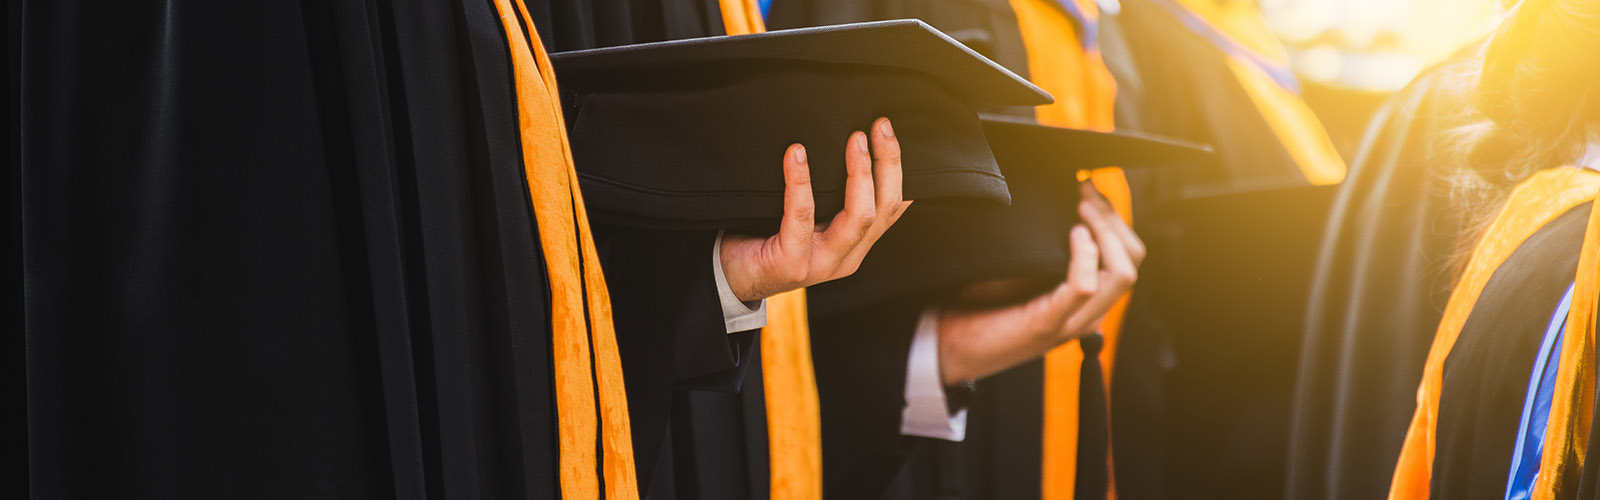 graduates holding mortarboards with bright sun 1600x500px.jpg